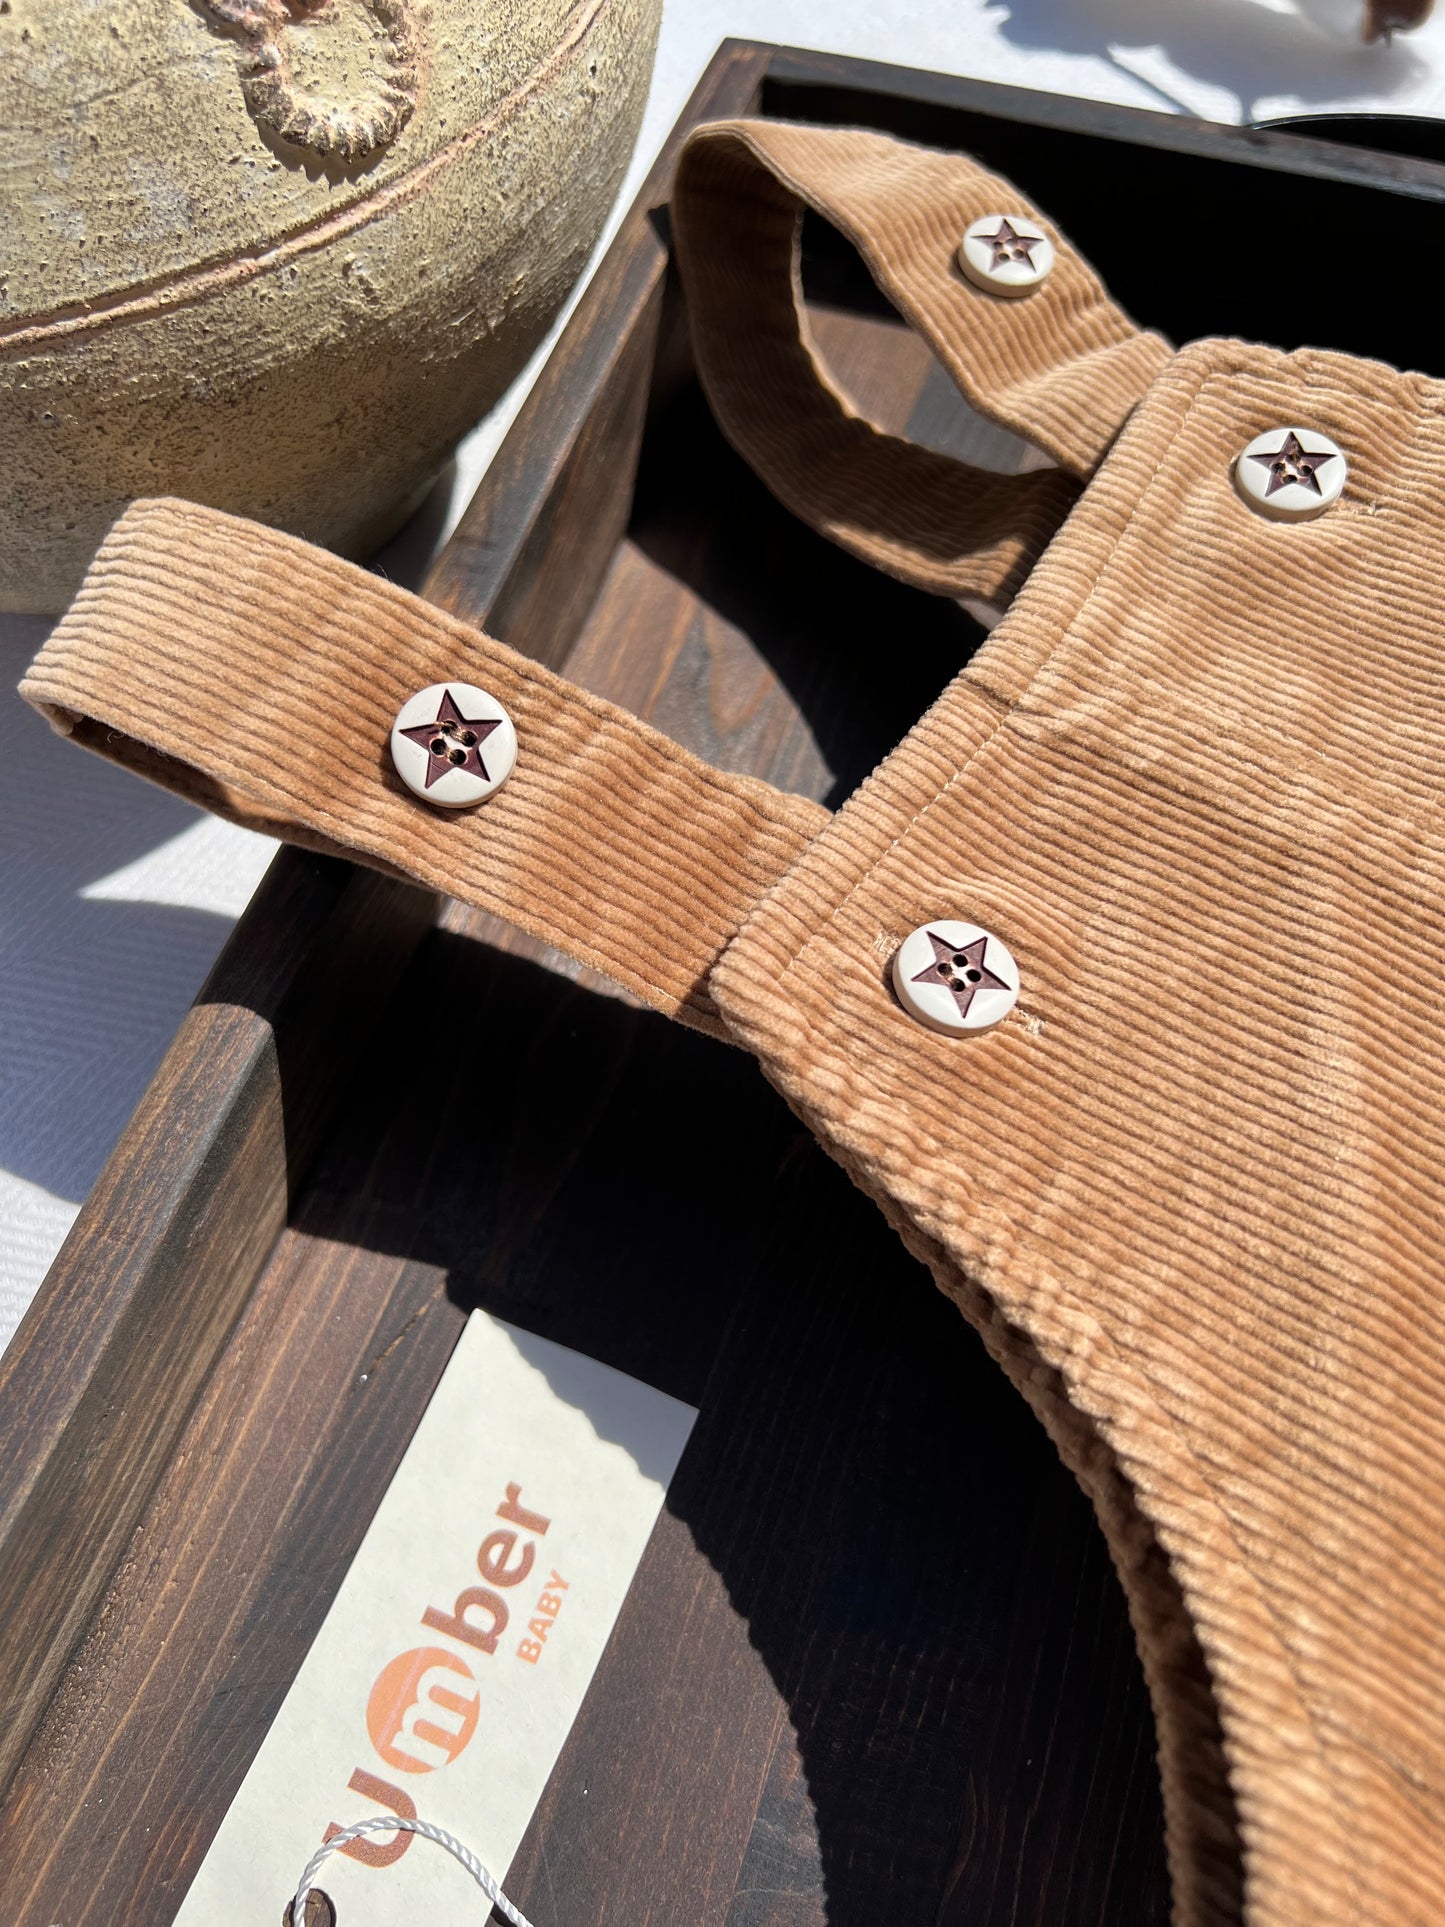 Brown Corduroy Baby Overalls with Adjustable Button-up Straps, Buttons are White with Brown Stars